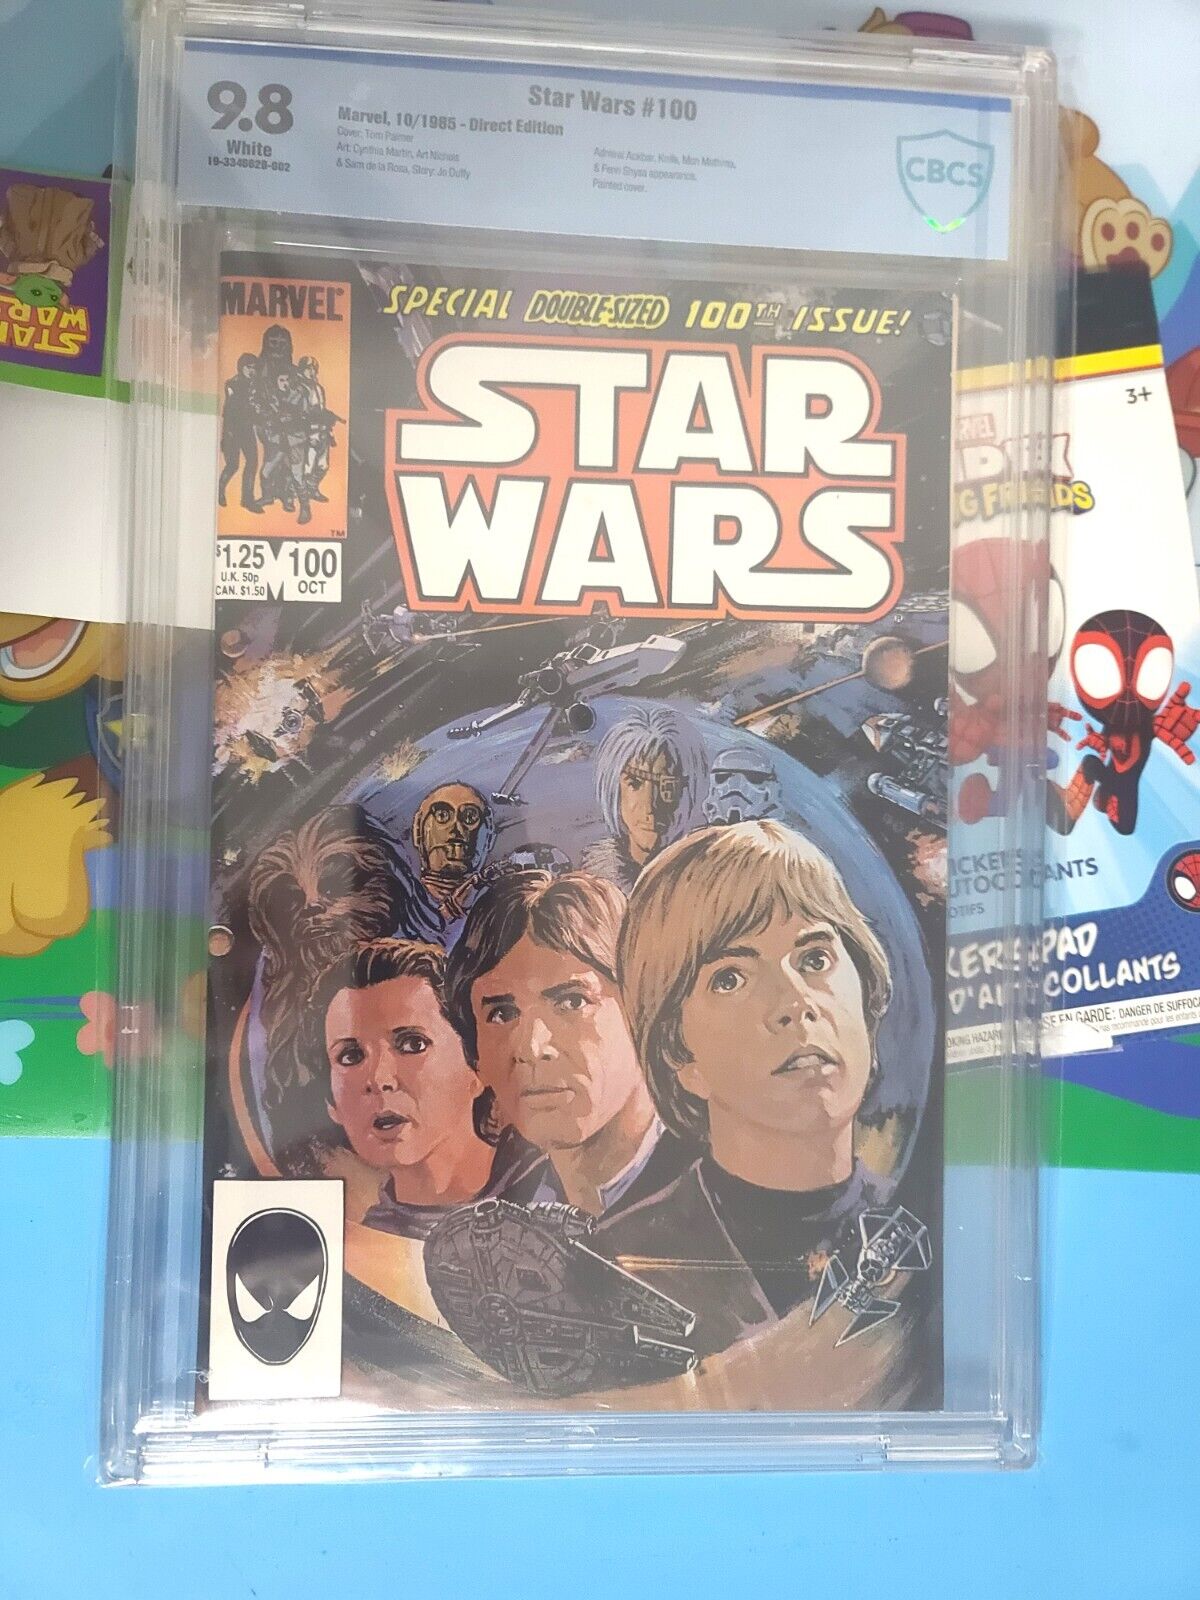 STAR WARS #100 (1985) CBCS 9.8 WHITE PAGES MARVEL COMICS NM